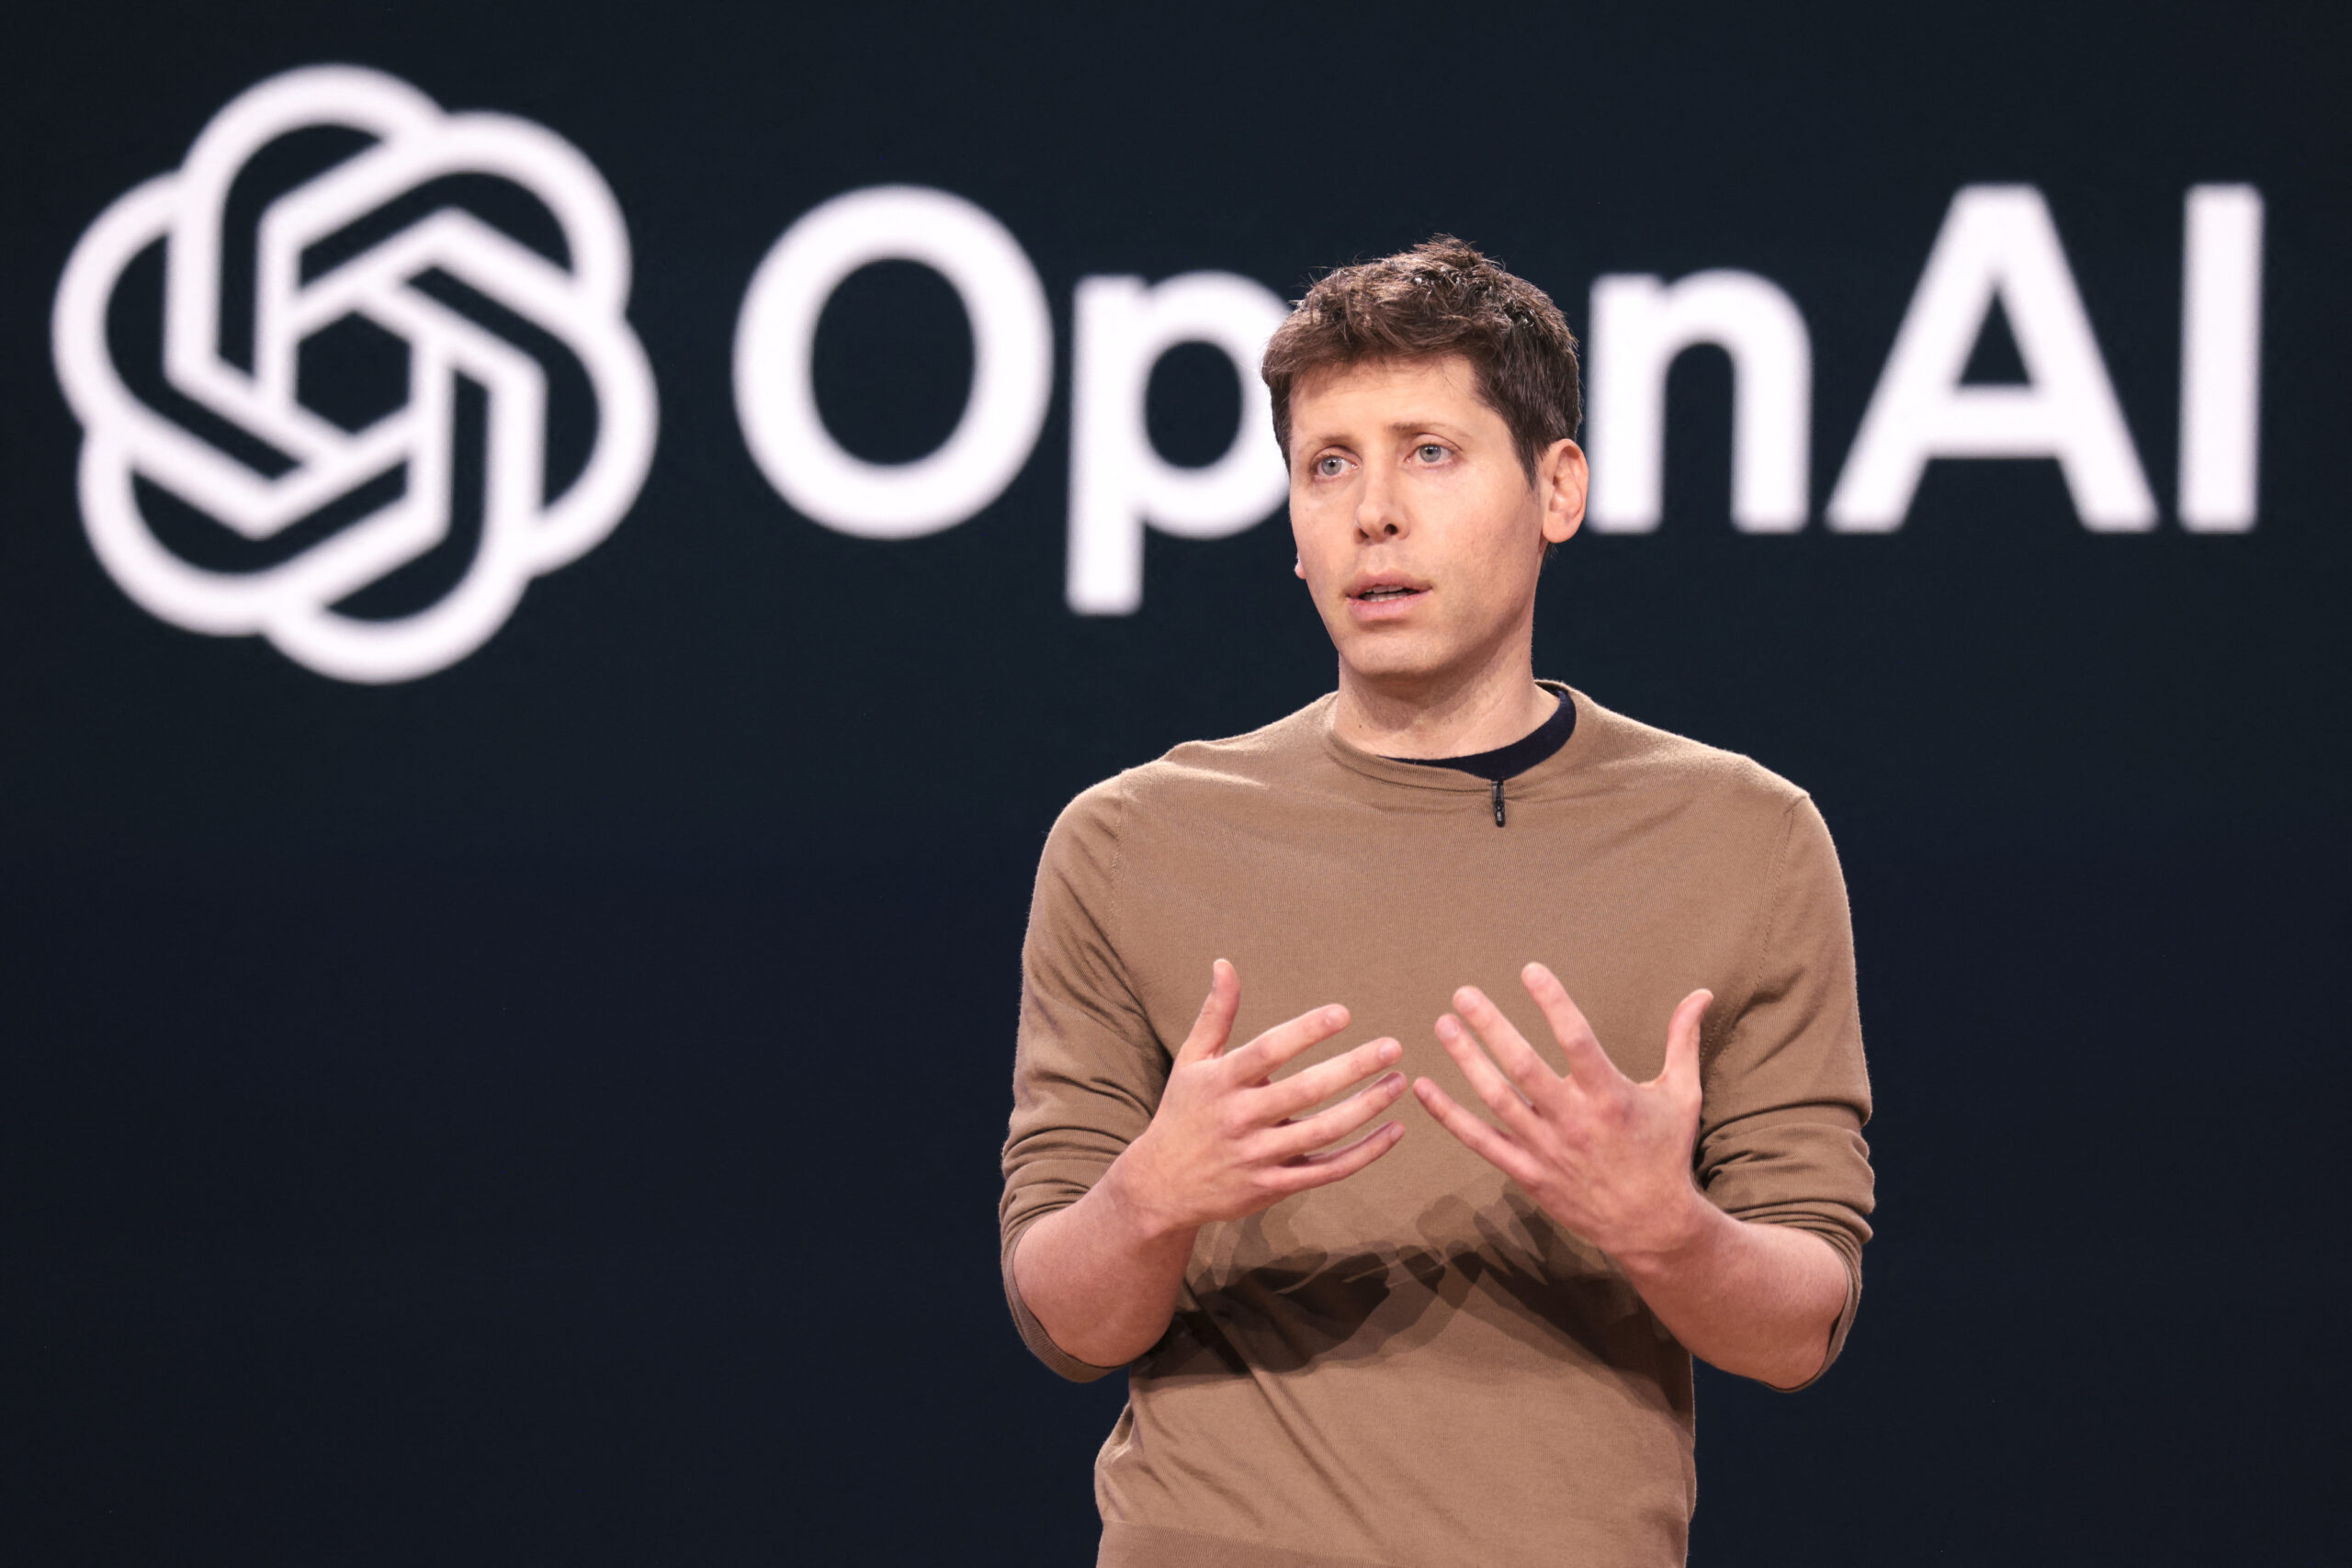 OpenAI and News Corp Announce Partnership to Train AI with Journalistic Content